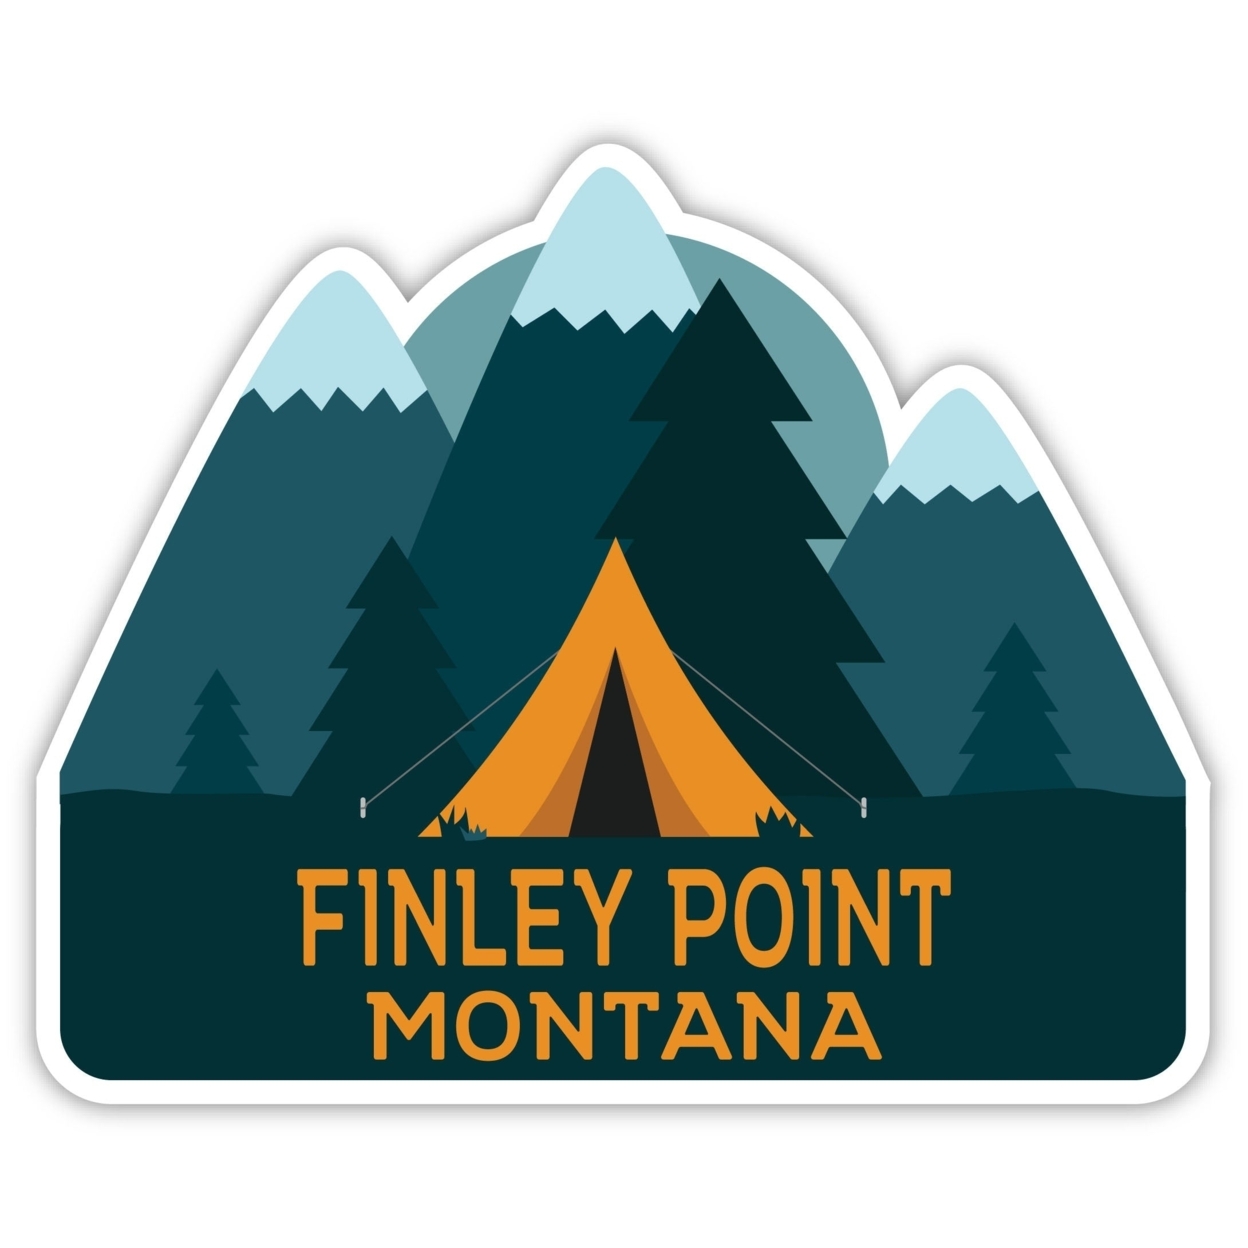 Finley Point Montana Souvenir Decorative Stickers (Choose Theme And Size) - 4-Pack, 10-Inch, Tent